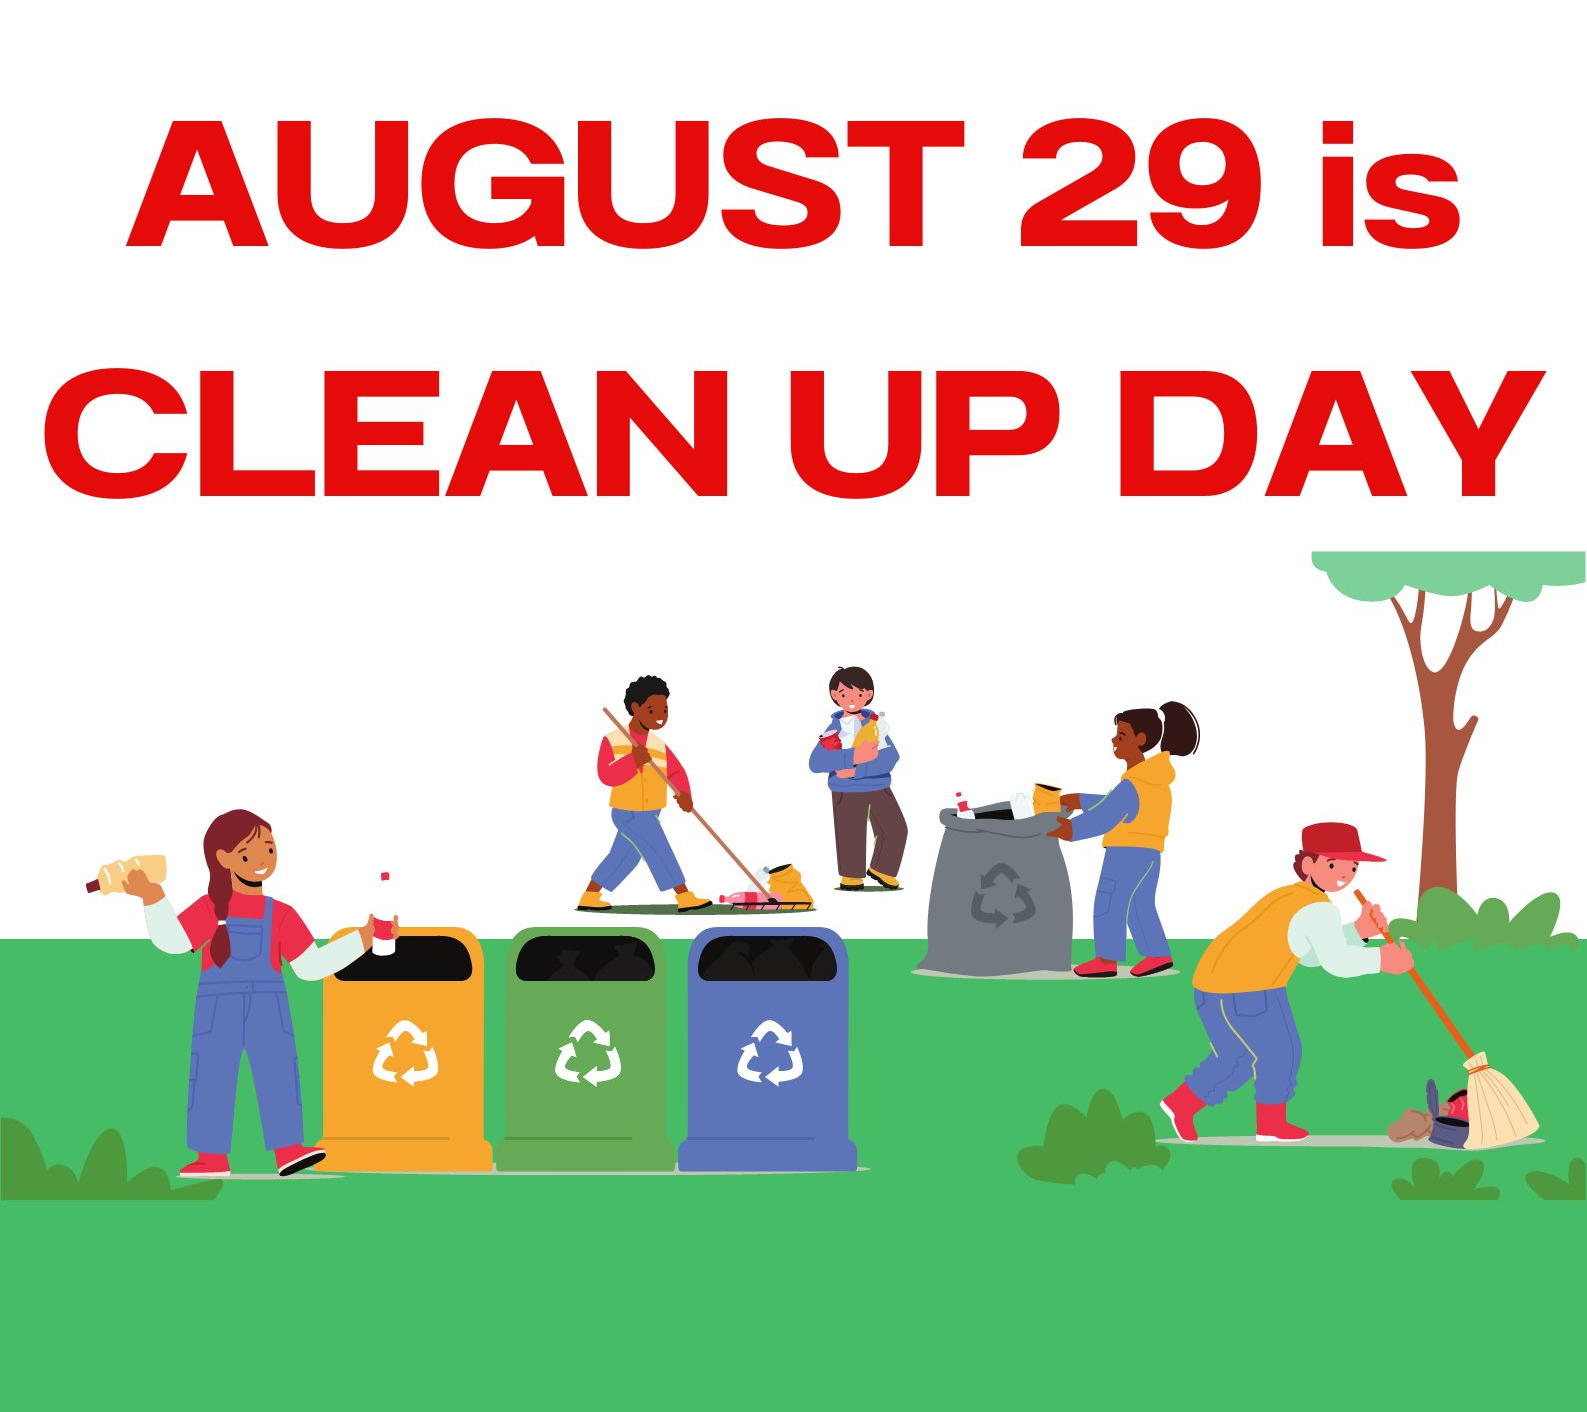 August 29 has been declared as “Clean Up Day.”